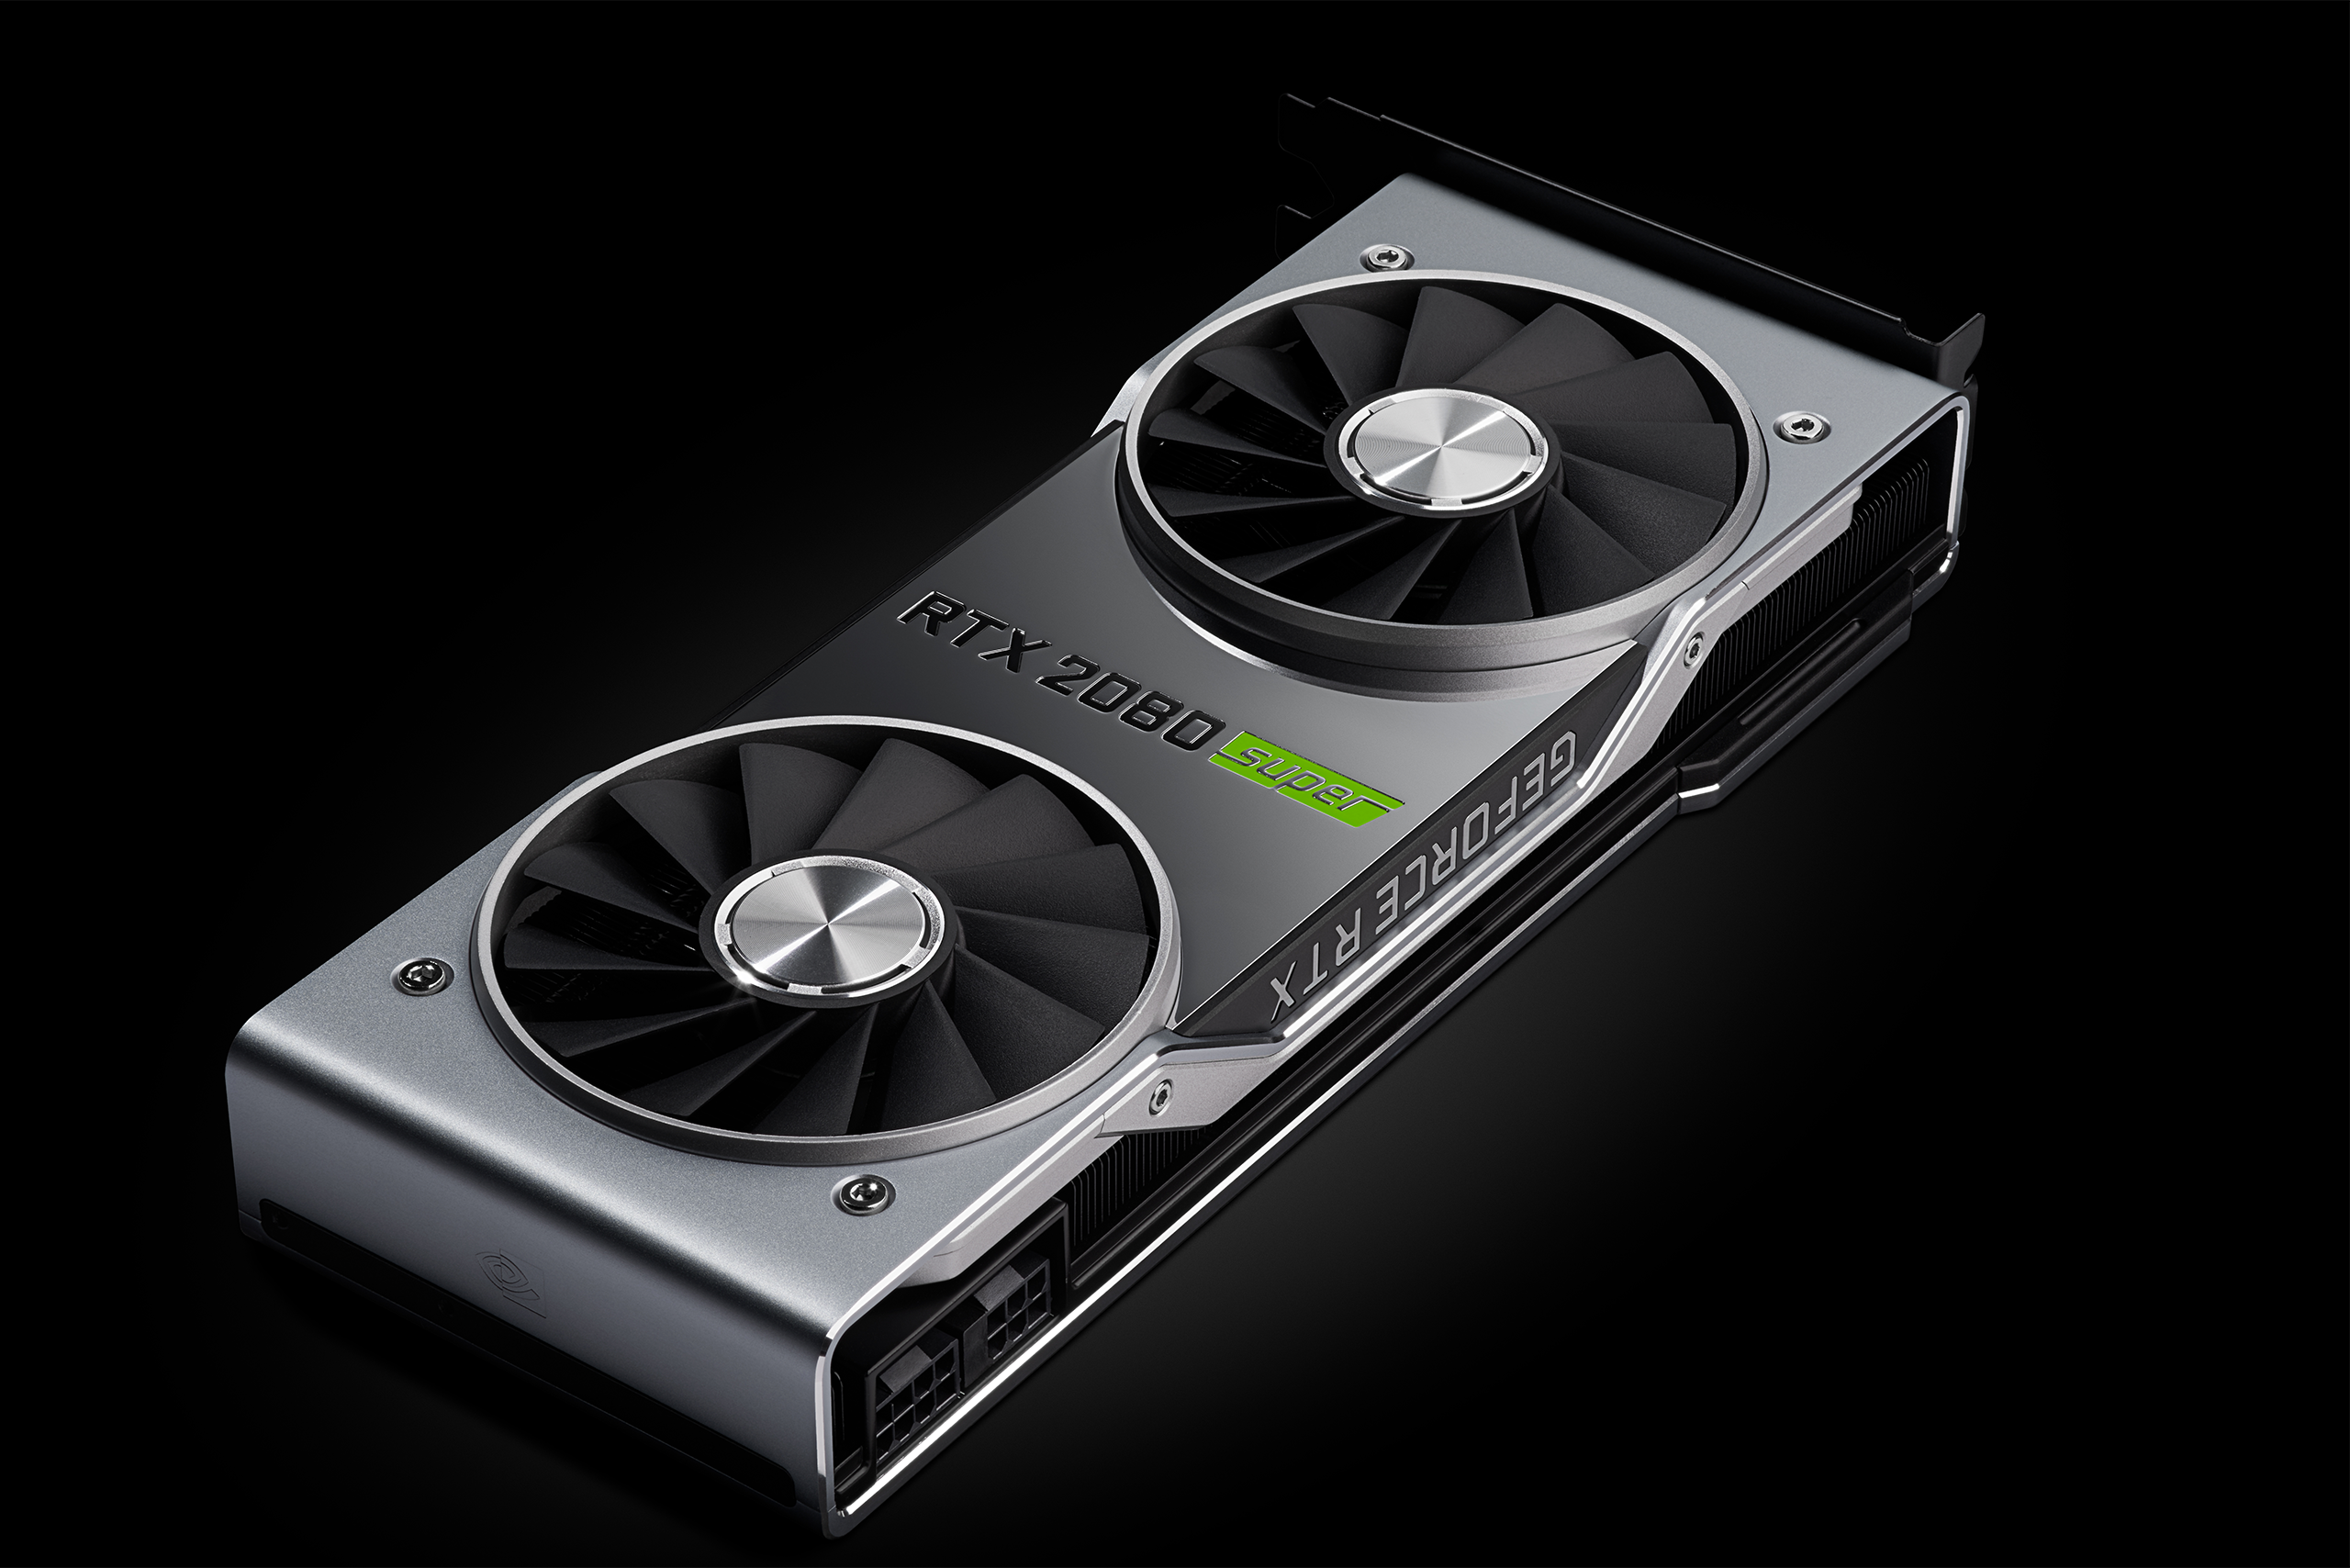 Velkendt Diagnose møl Release of an Nvidia GeForce RTX 2080 Ti SUPER graphics card could depend  on AMD - NotebookCheck.net News